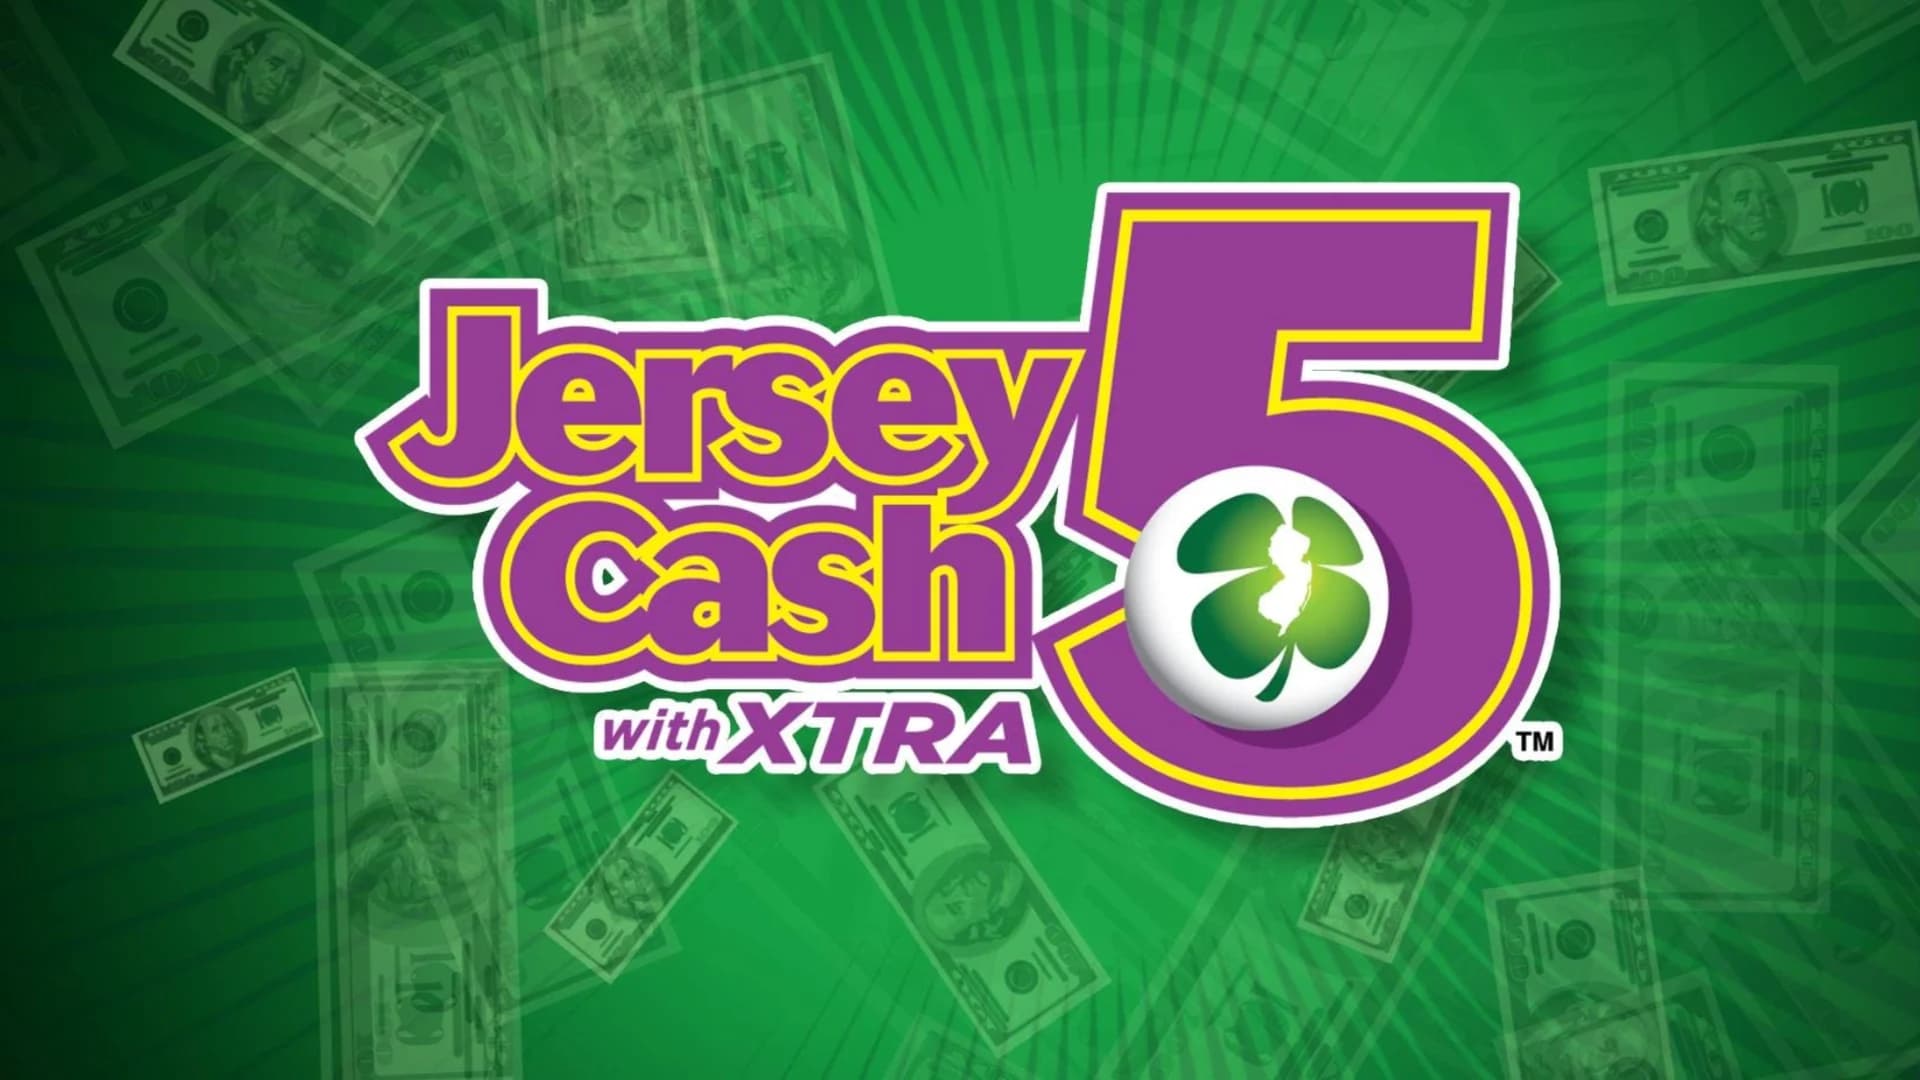 Winning lottery ticket worth $884K sold in Passaic County